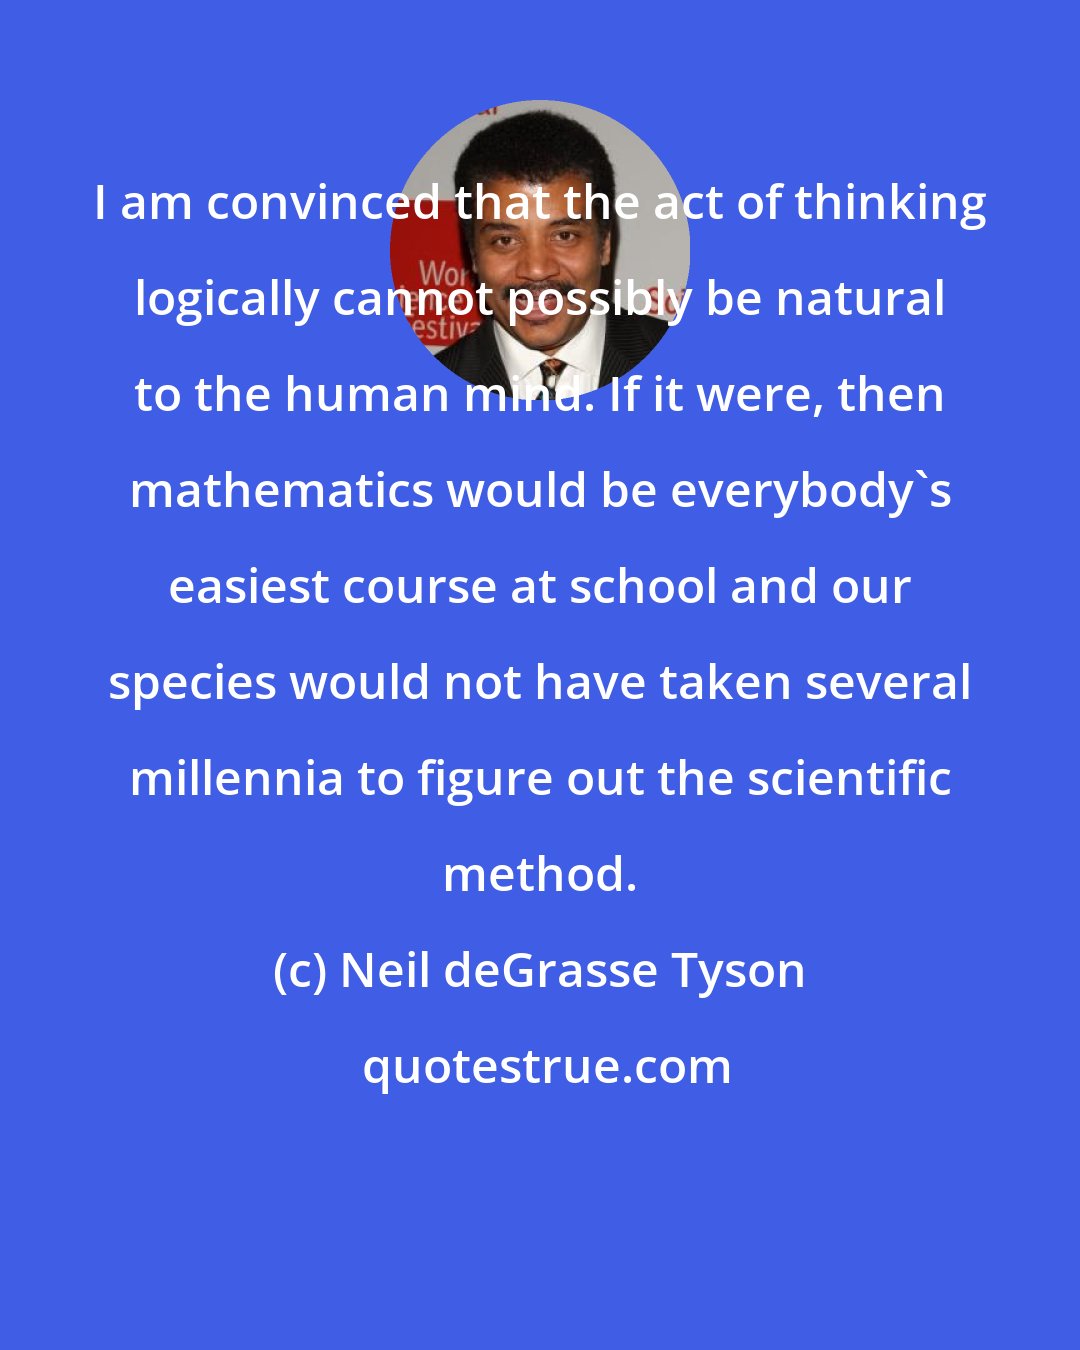 Neil deGrasse Tyson: I am convinced that the act of thinking logically cannot possibly be natural to the human mind. If it were, then mathematics would be everybody's easiest course at school and our species would not have taken several millennia to figure out the scientific method.